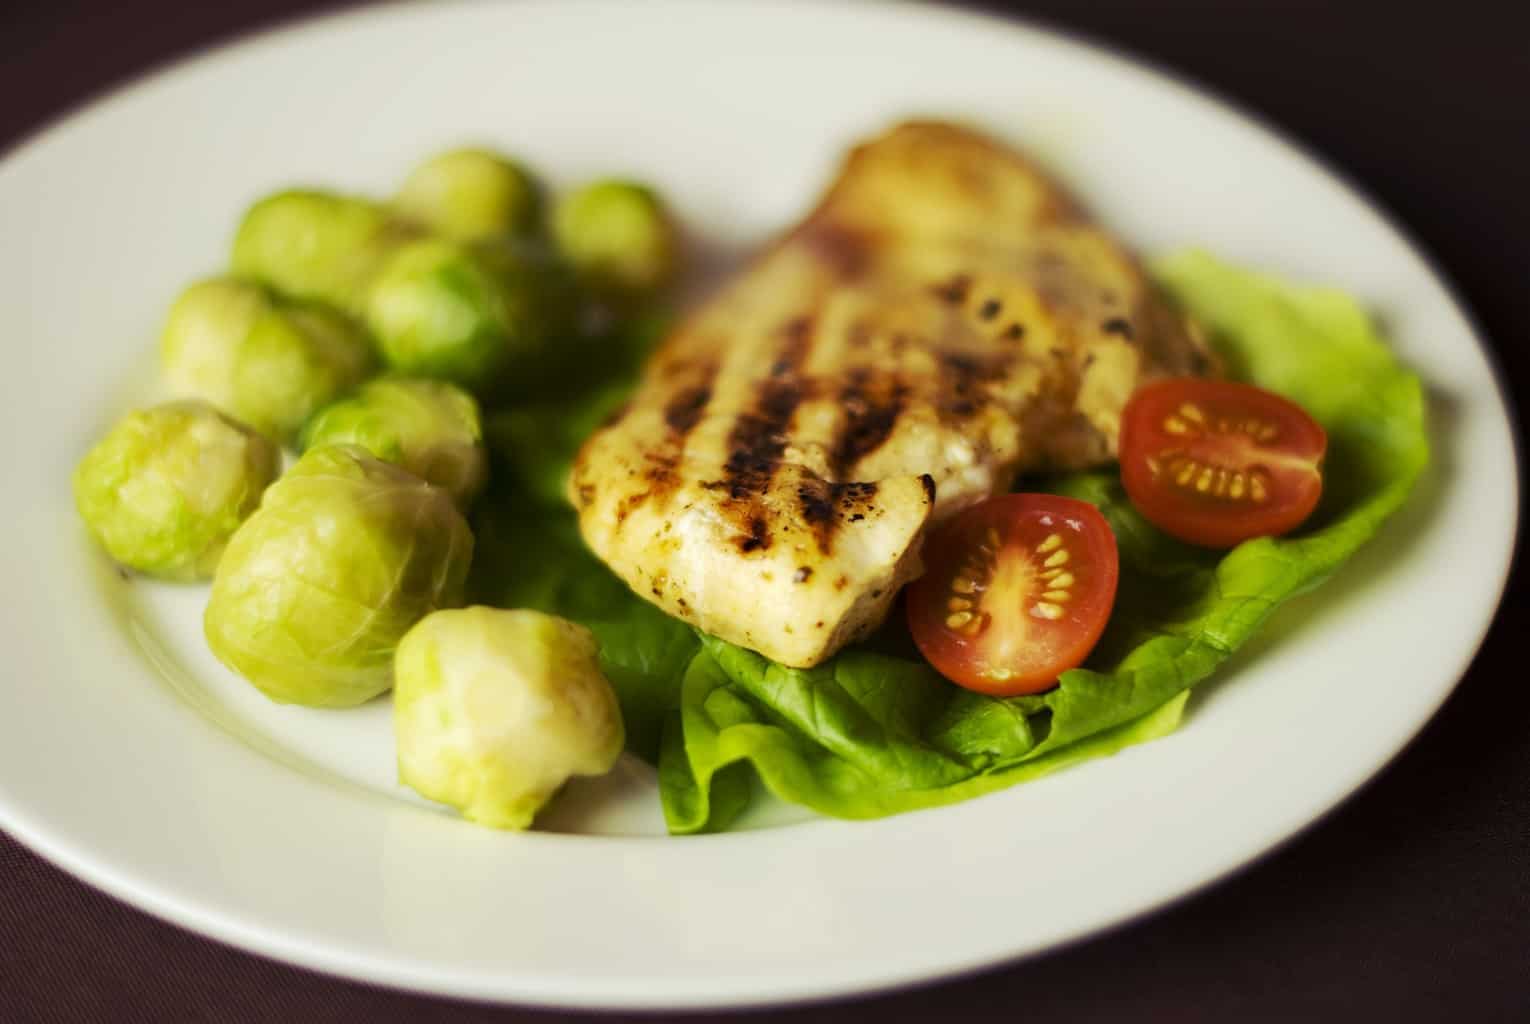 healthy meal of chicken and brussels sprouts